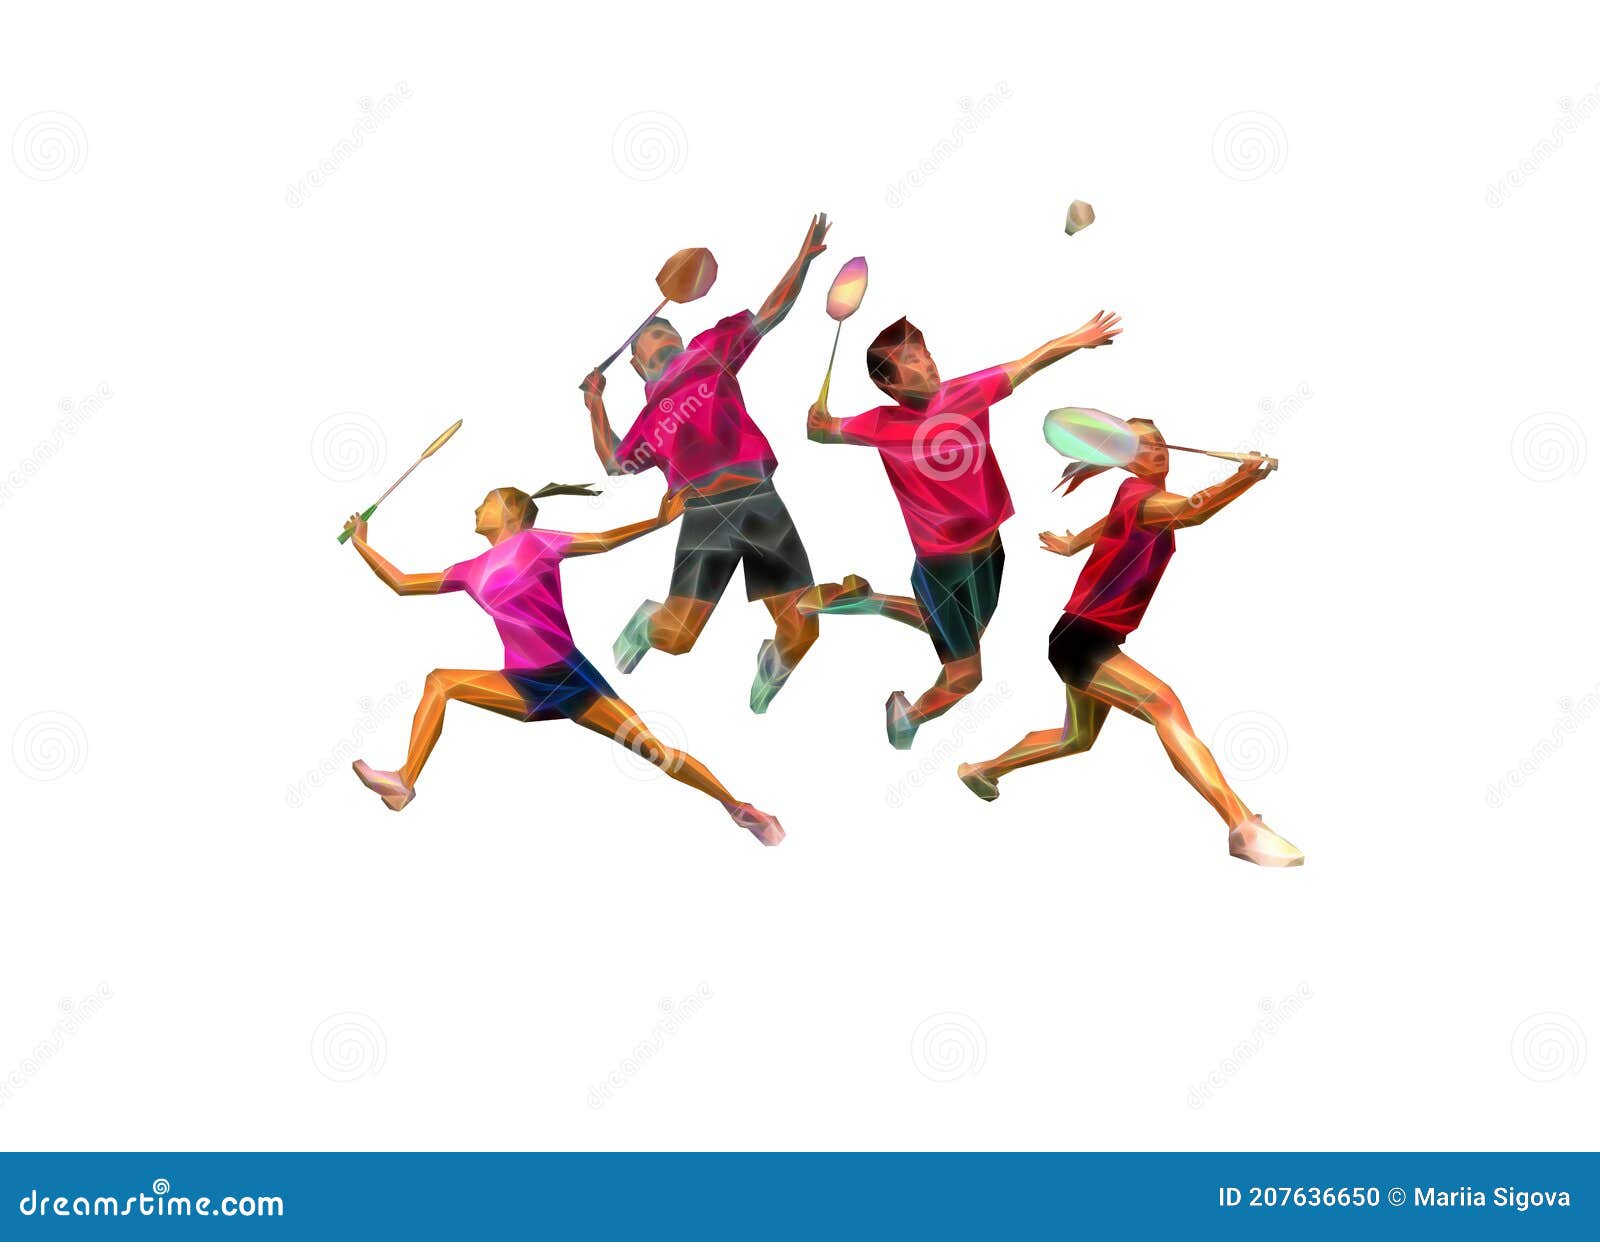 Sports Poster with Badminton Players Team Invitation Stock Illustration -  Illustration of health, exercise: 207636650